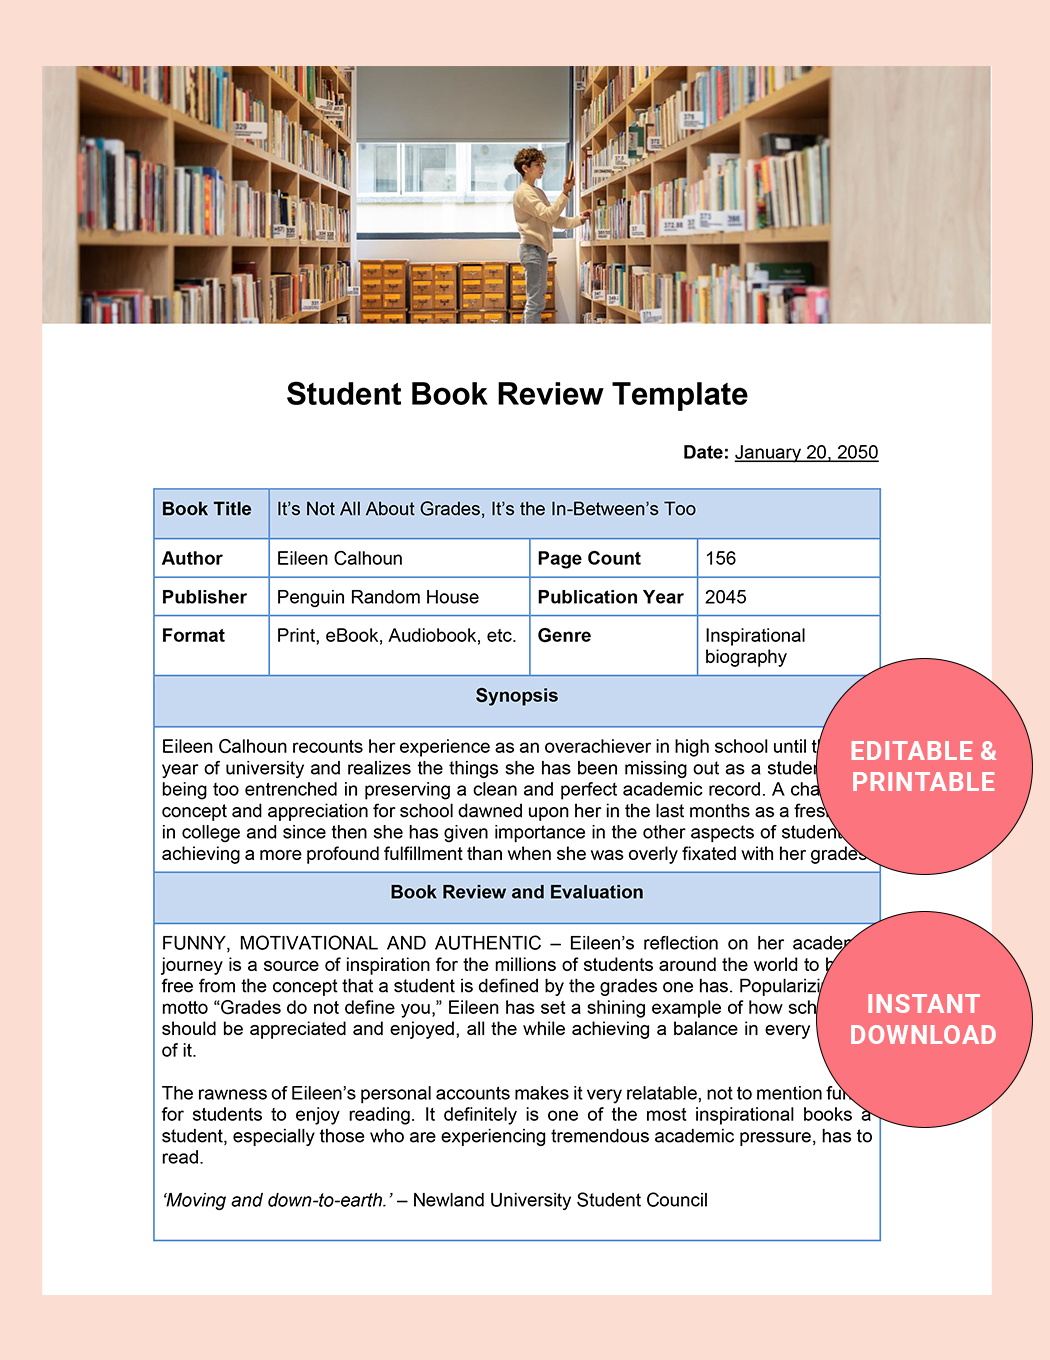 Student Book Review Template